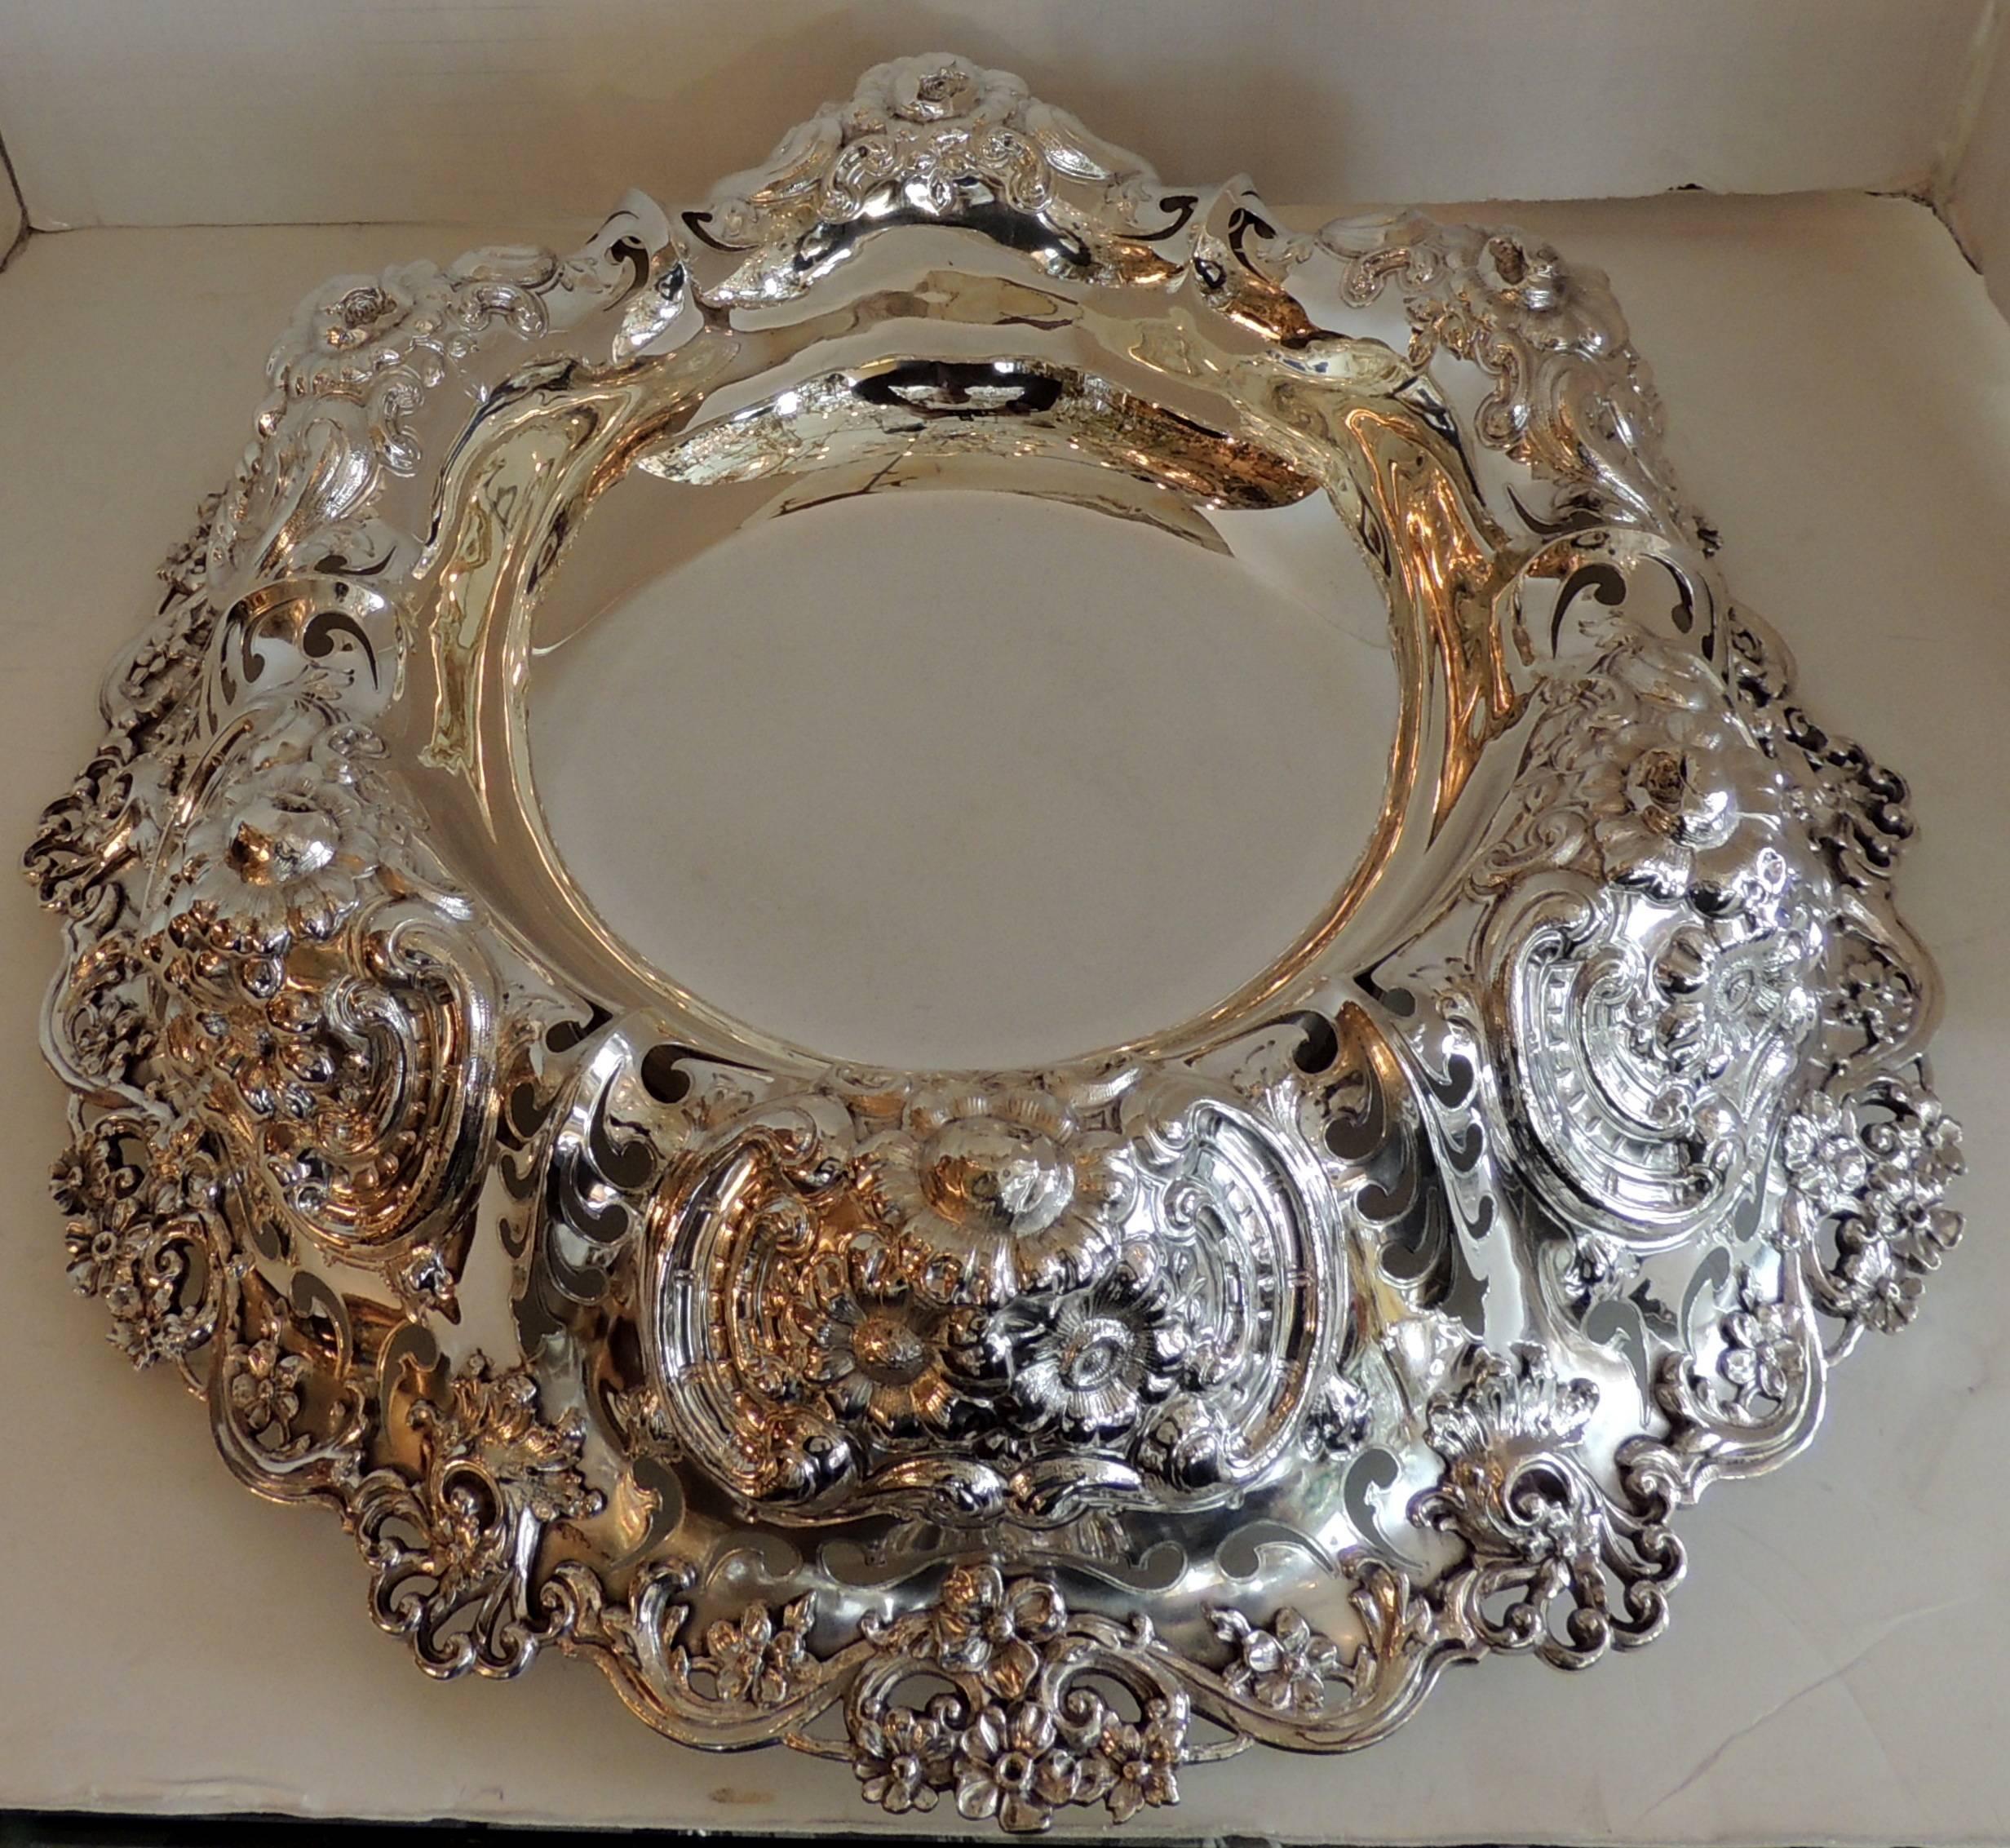 A monumental sterling silver centrepiece by Whiting marked on the under side sterling and model #4009 20